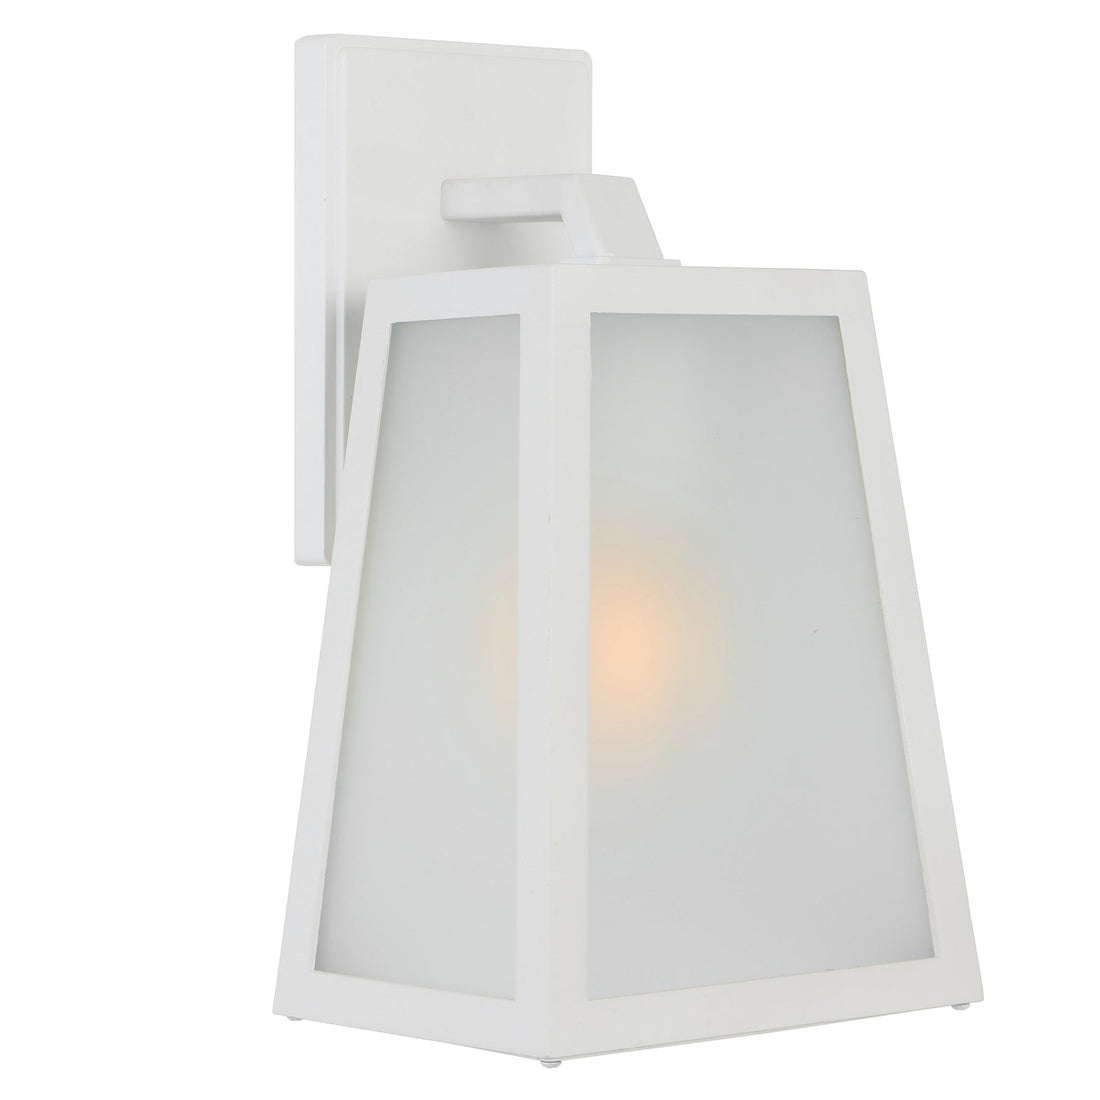 Cosca 180mm White with White Frost Glass Panel Exterior Coach Light